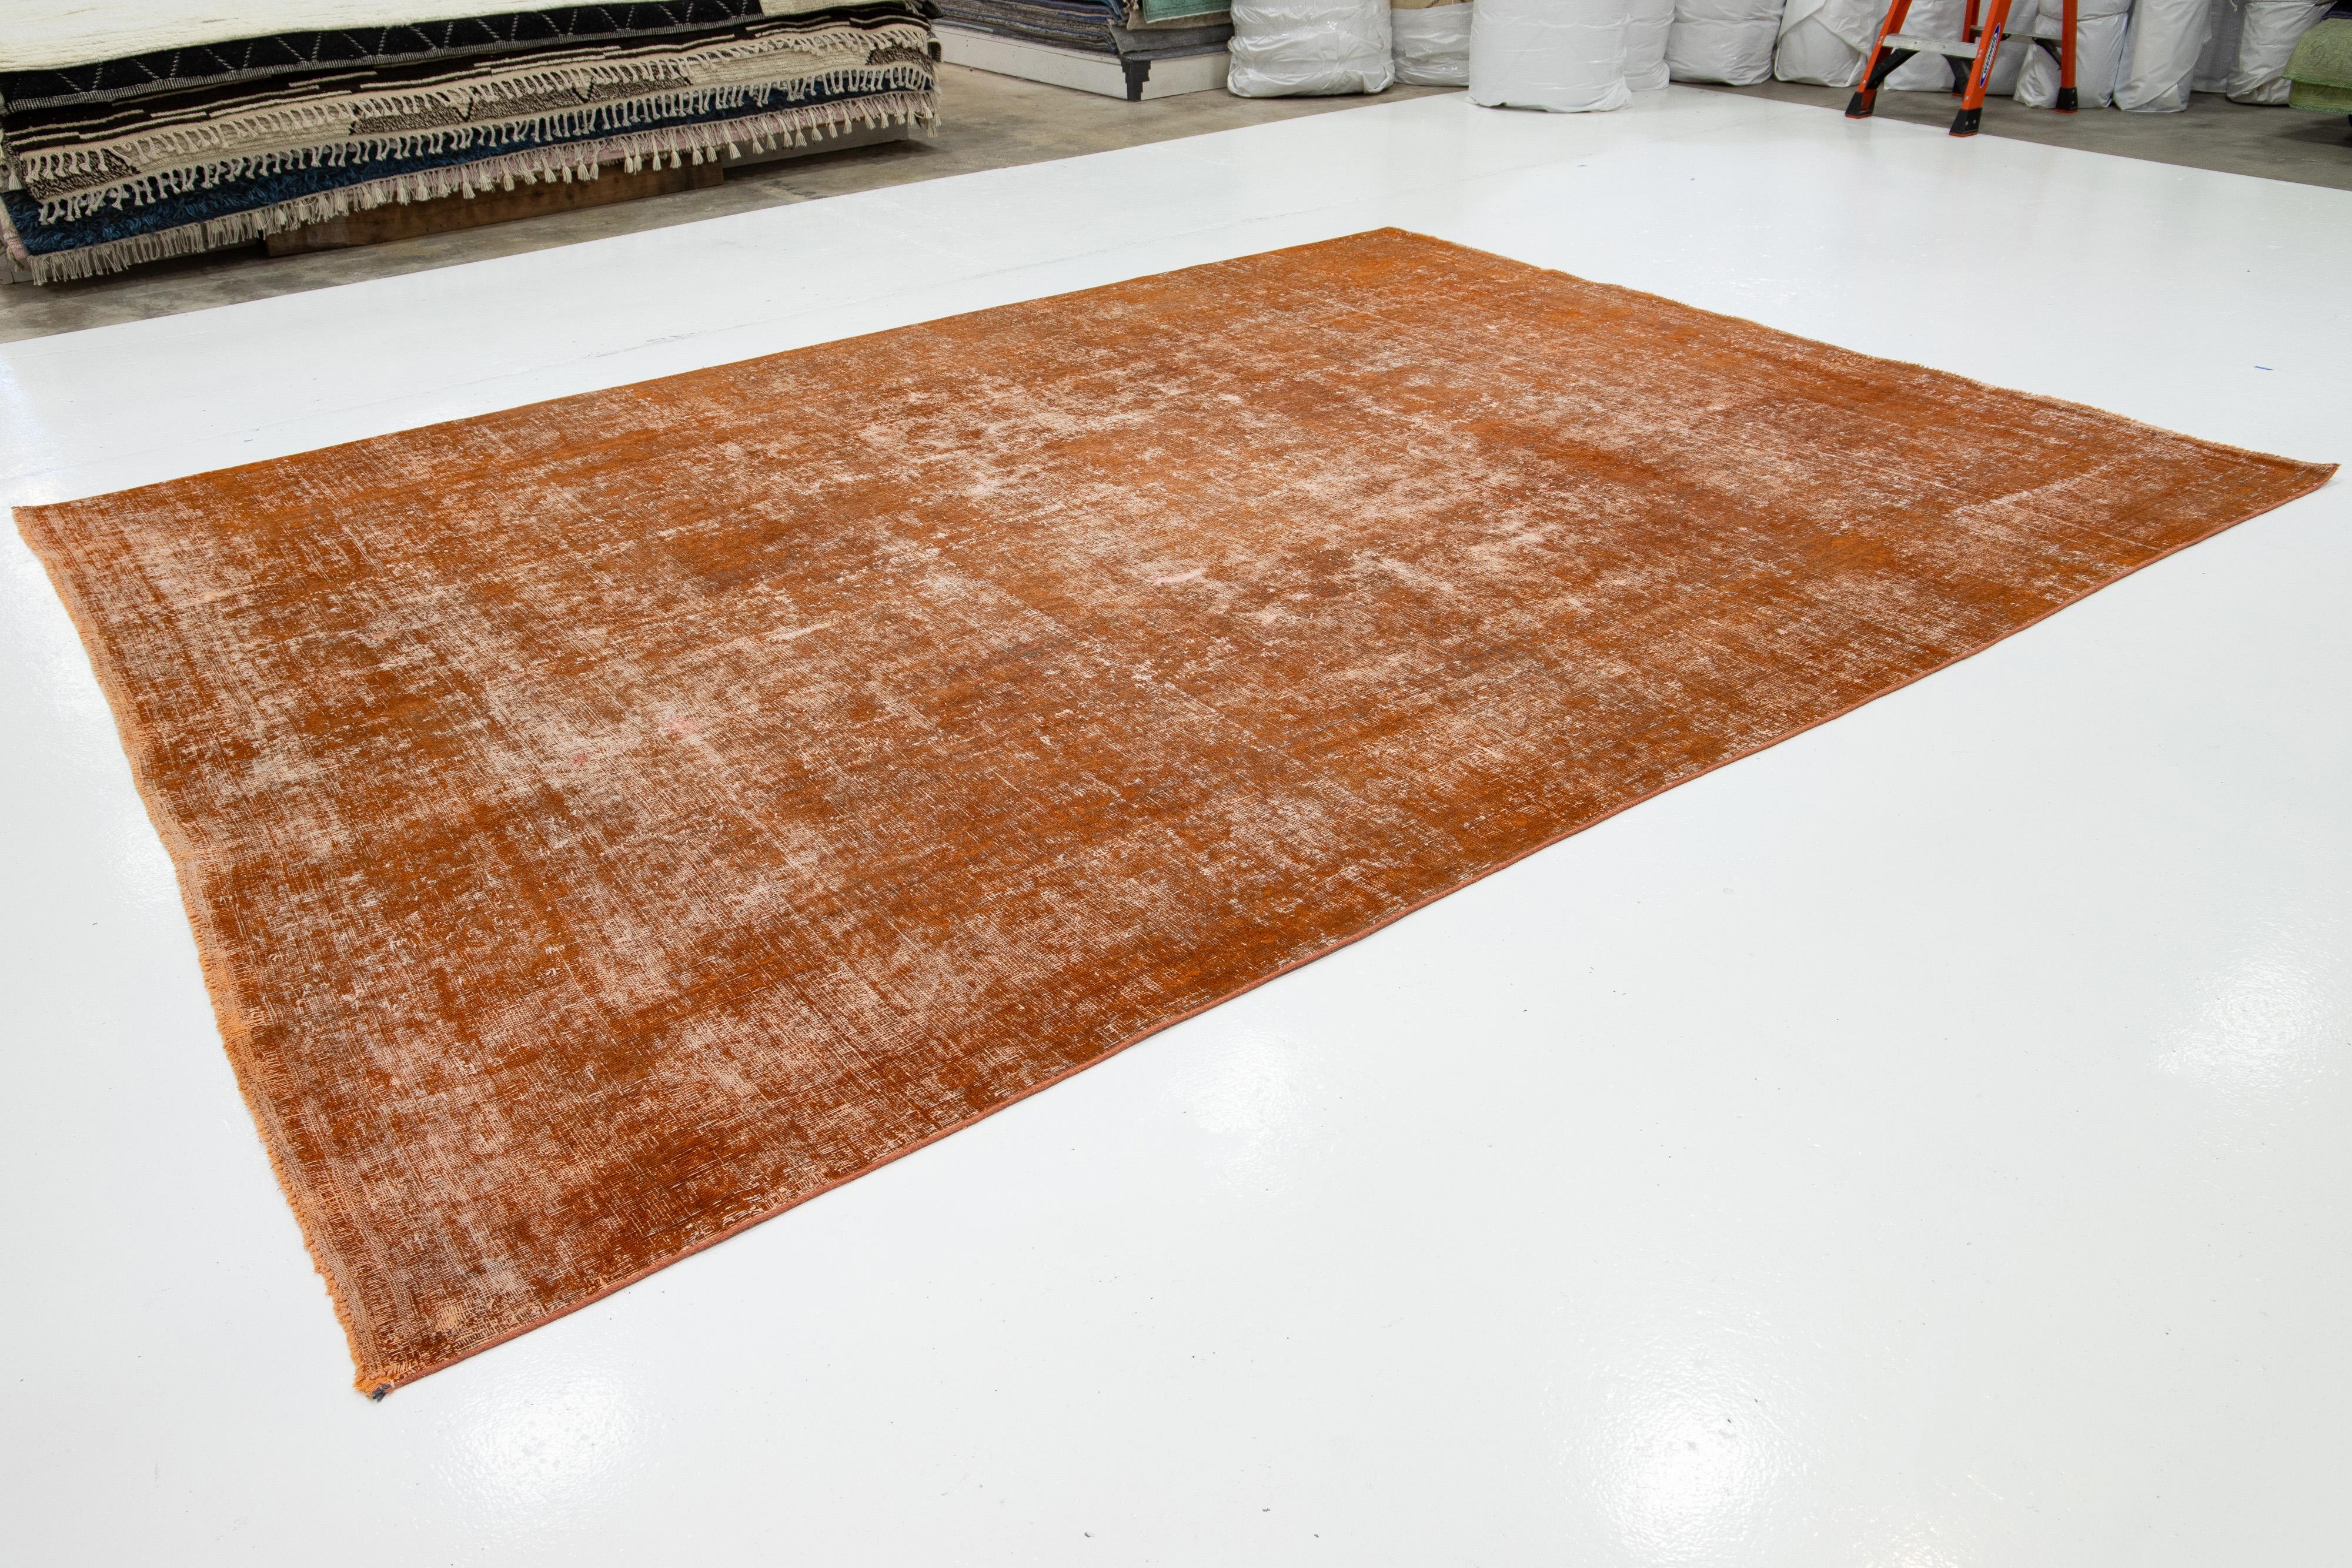  Antique Room size Orange Wool Rug Persian Overdyed With Allover Pattern In Good Condition For Sale In Norwalk, CT